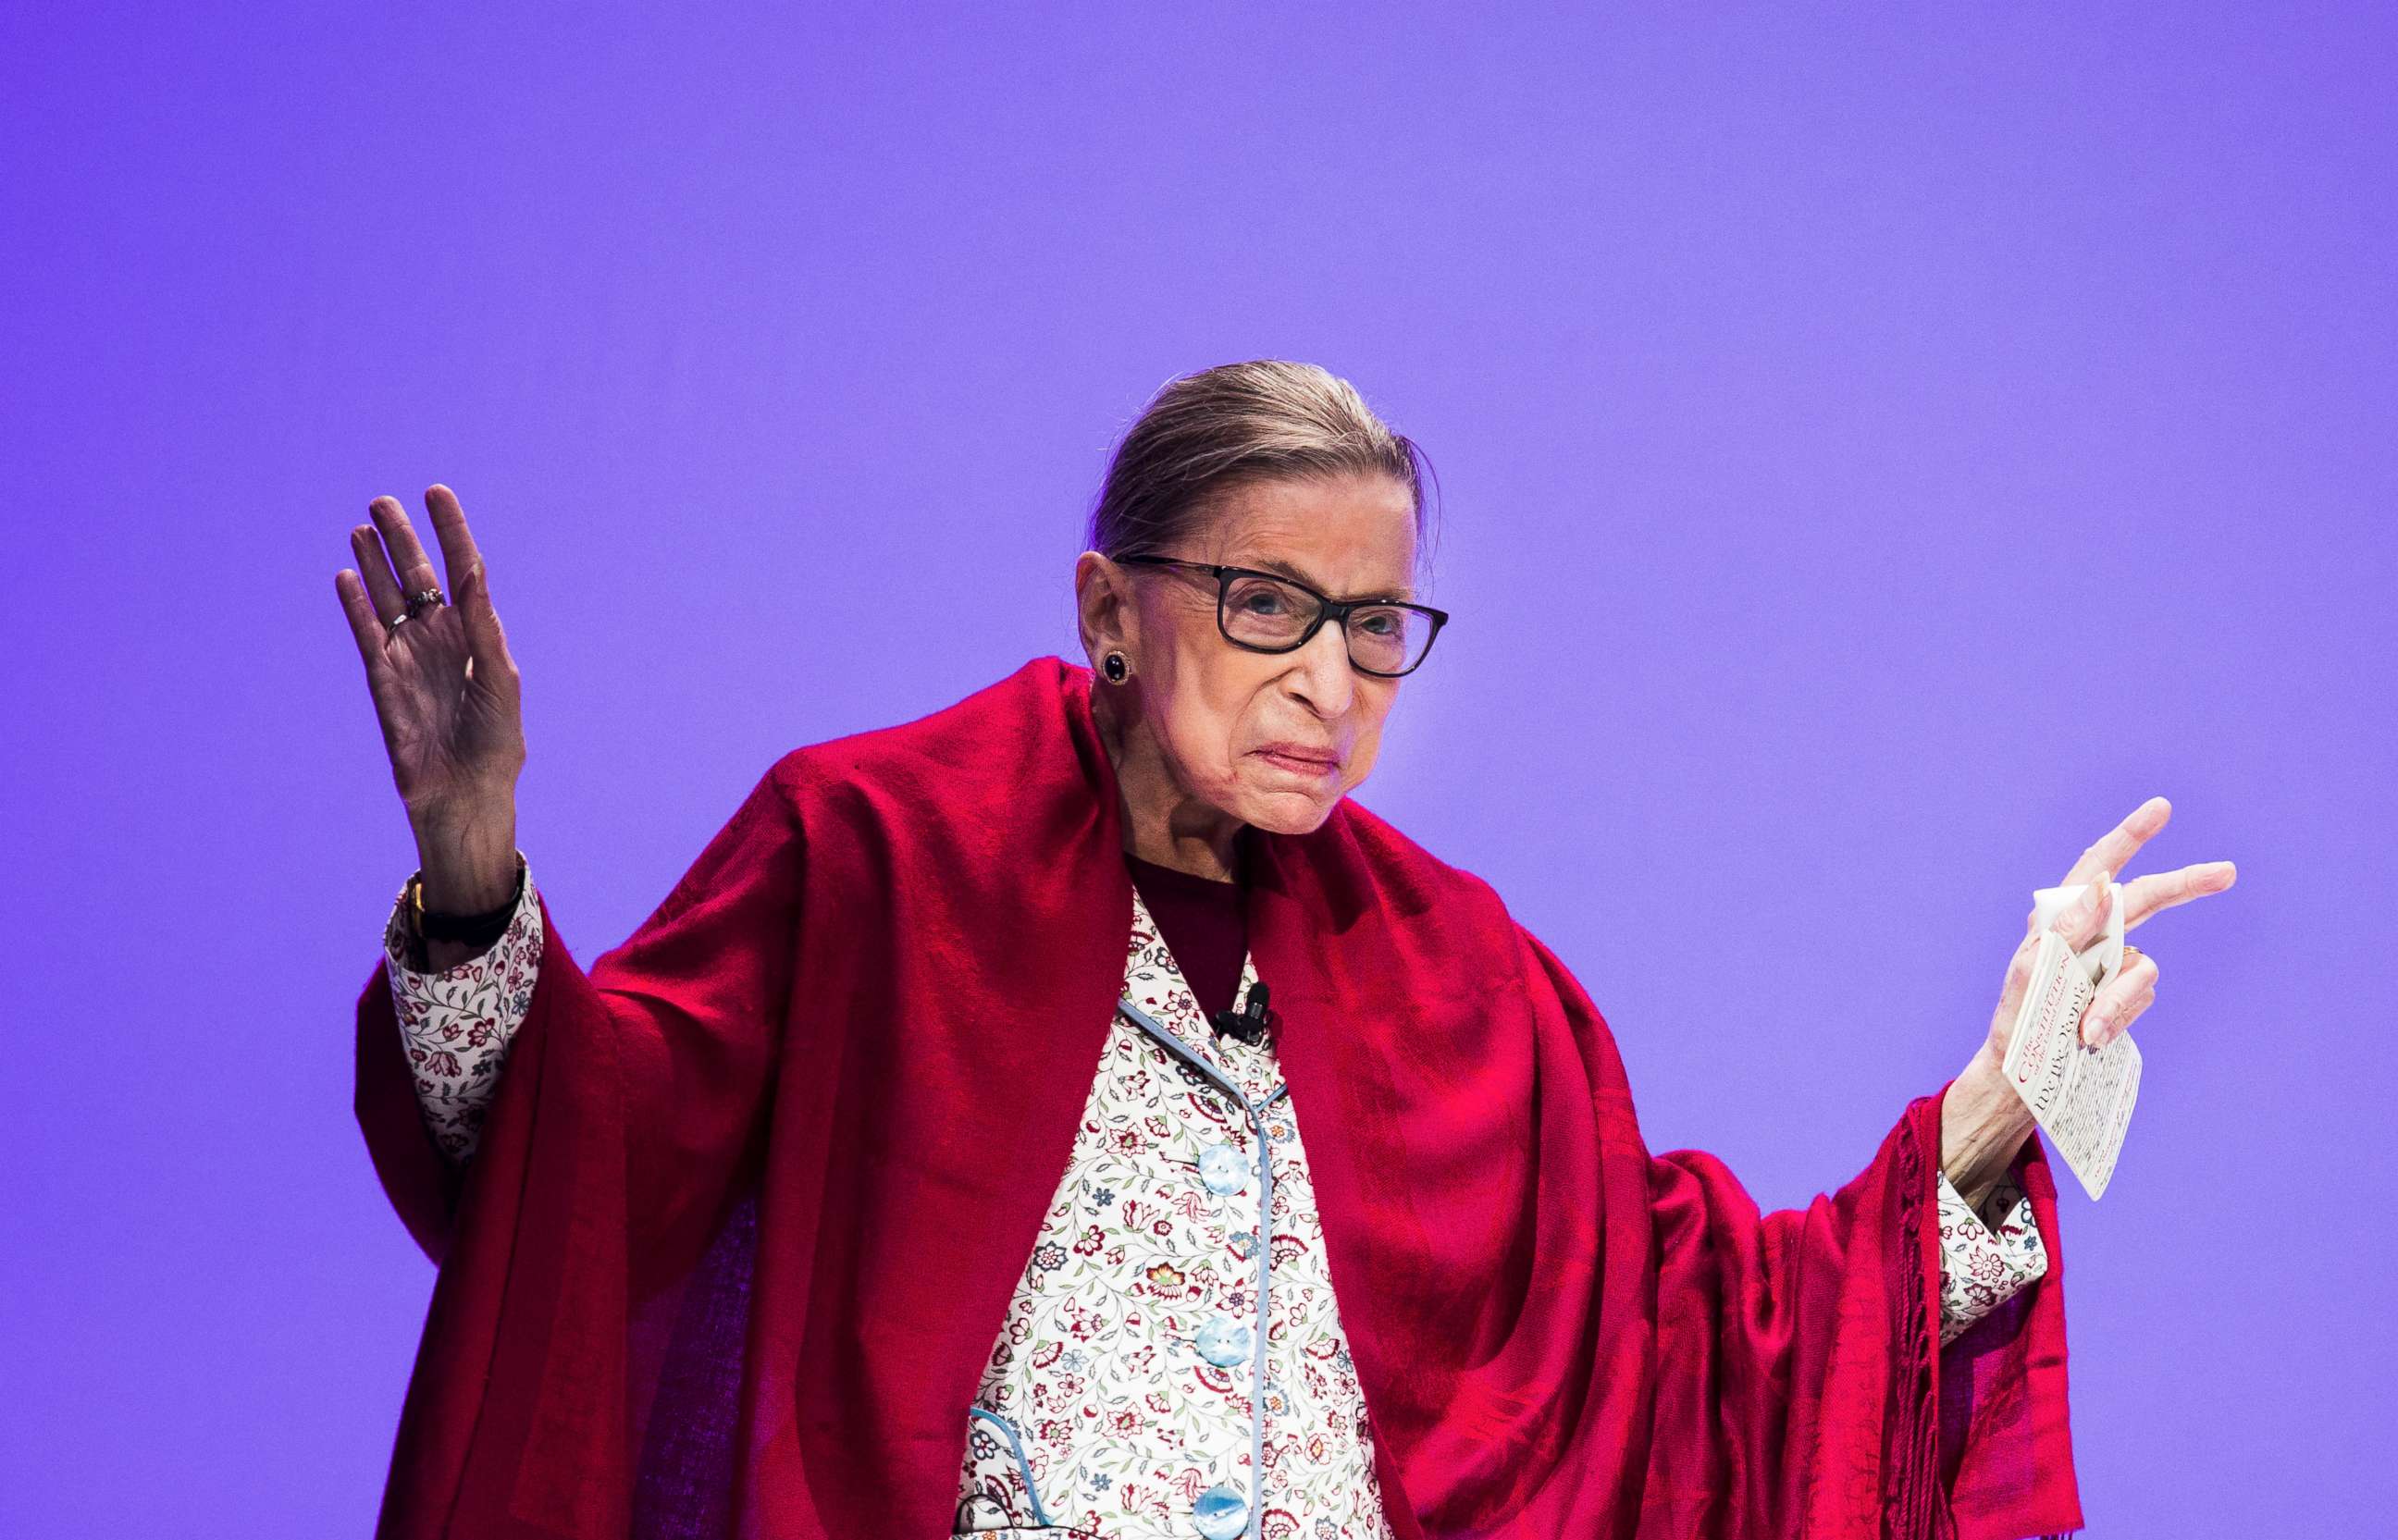 PHOTO: Supreme Court Justice Ruth Bader Ginsburg walks on the stage at Amherst College in Amherst, Mass., Oct. 3, 2019.